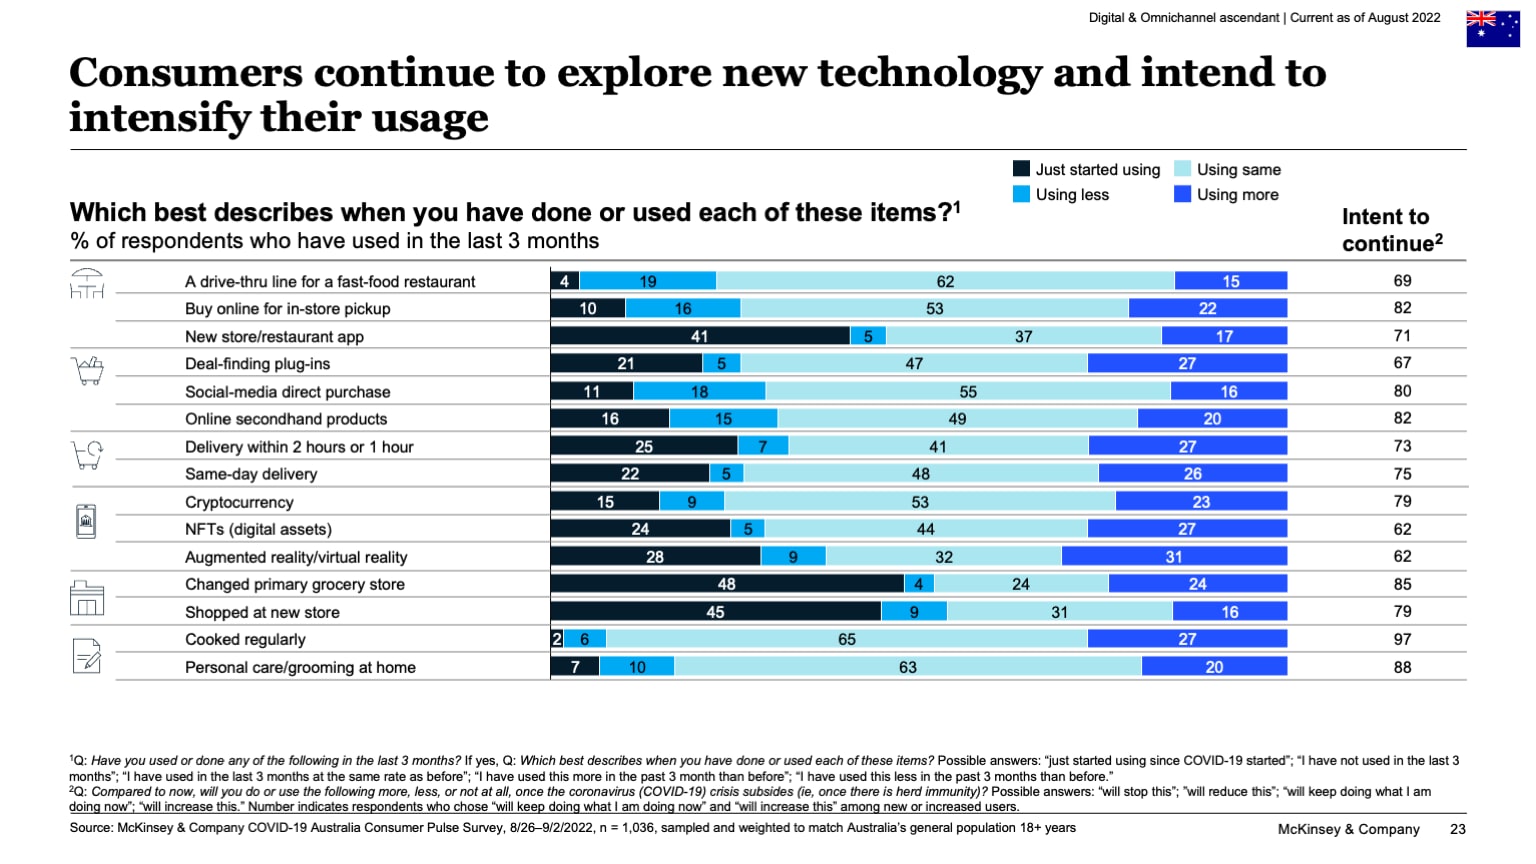 Consumers continue to explore new technology and intend to intensify their usage